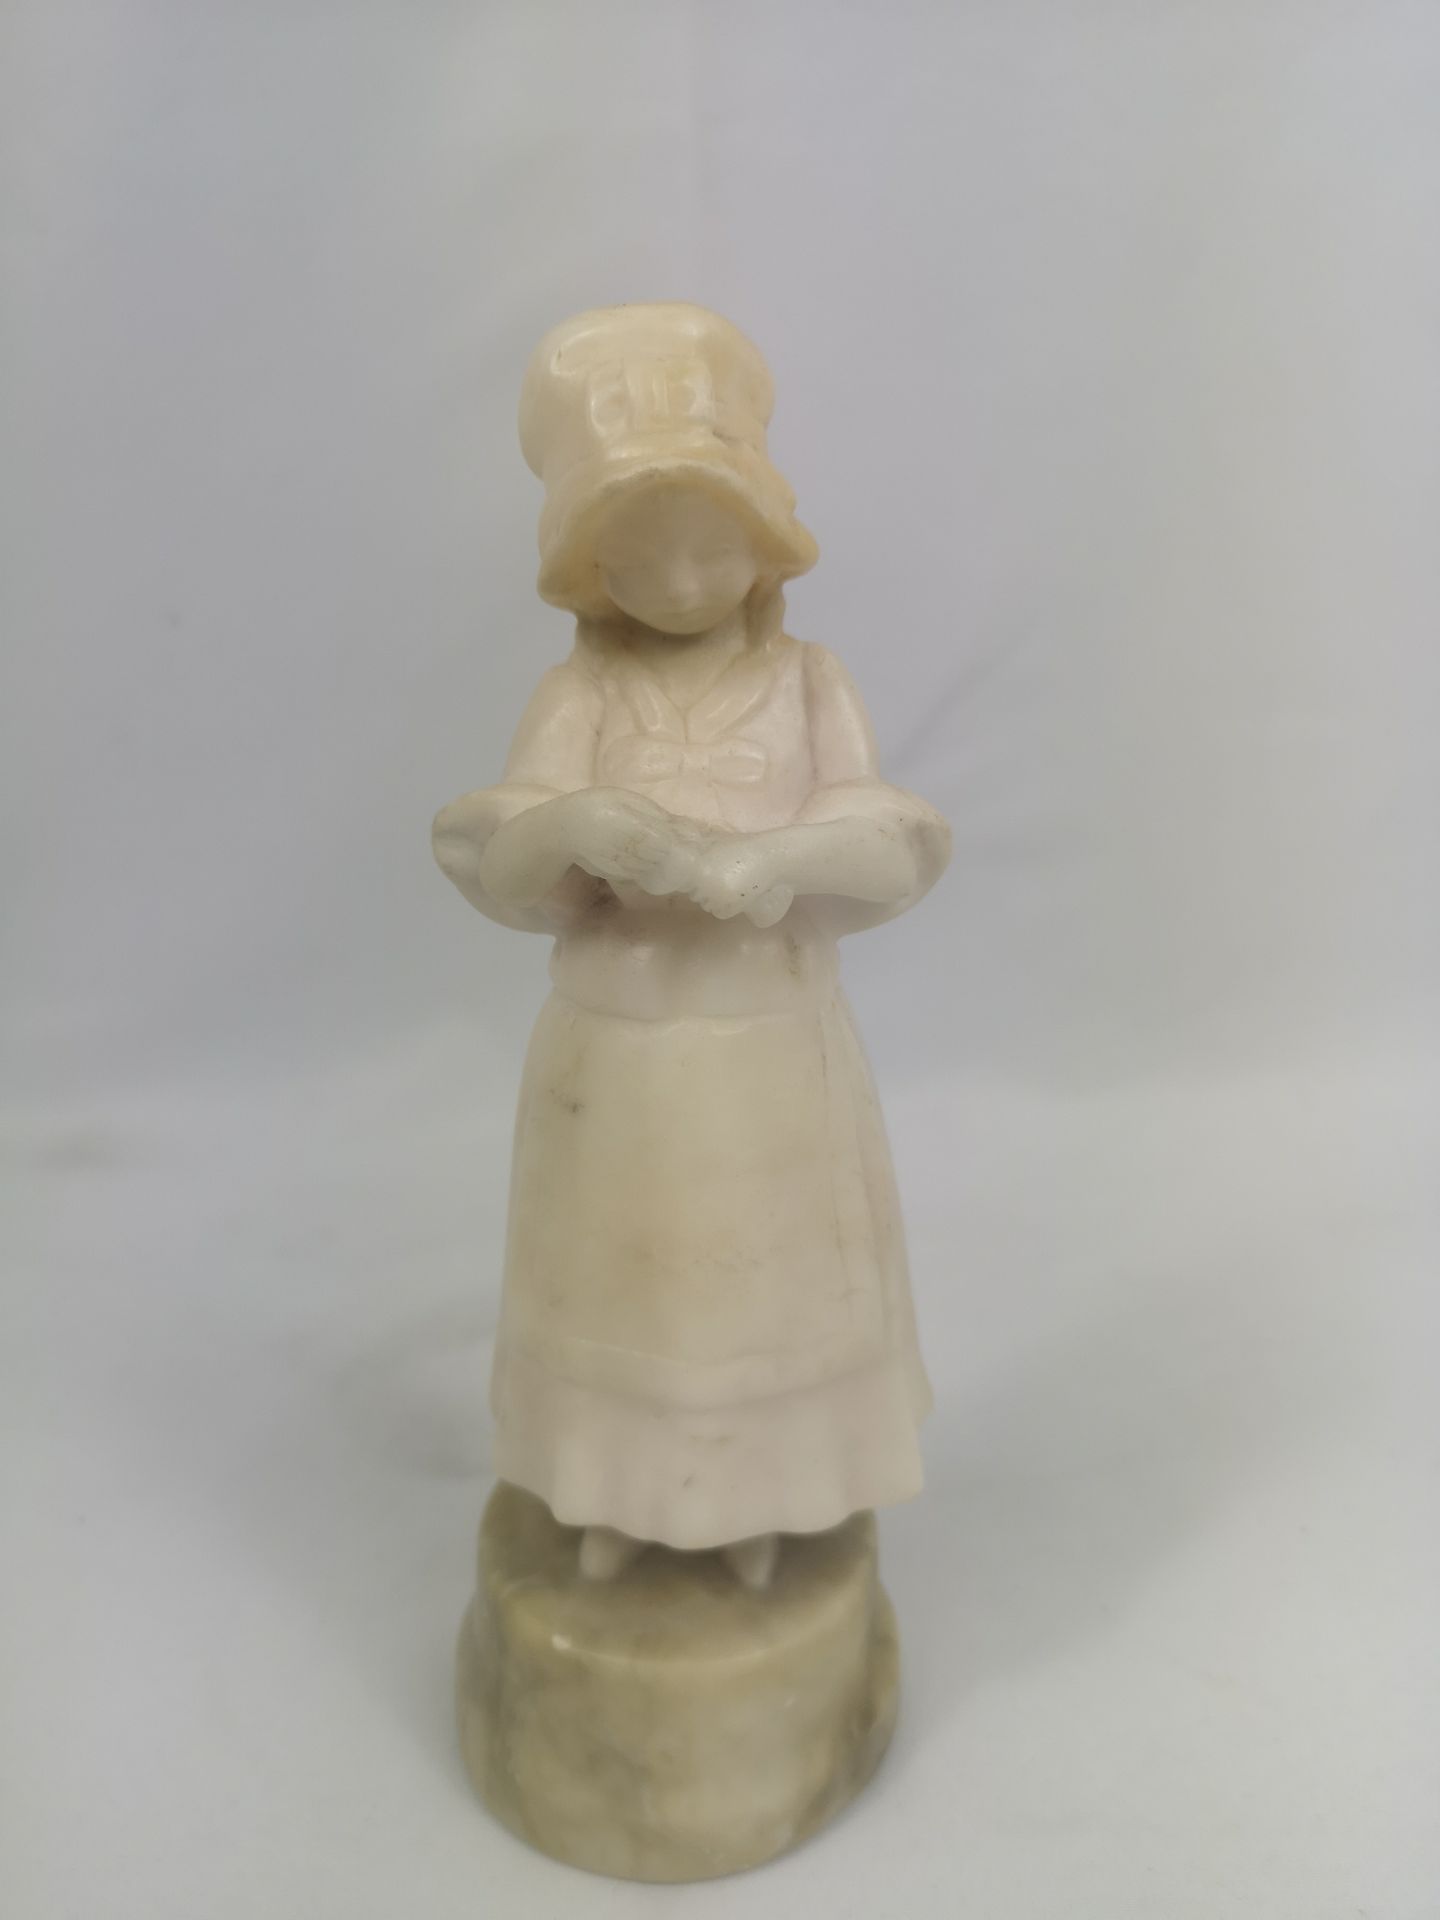 Art deco style Rosenthal figurine together with a Goldscheider figurine - Image 3 of 6